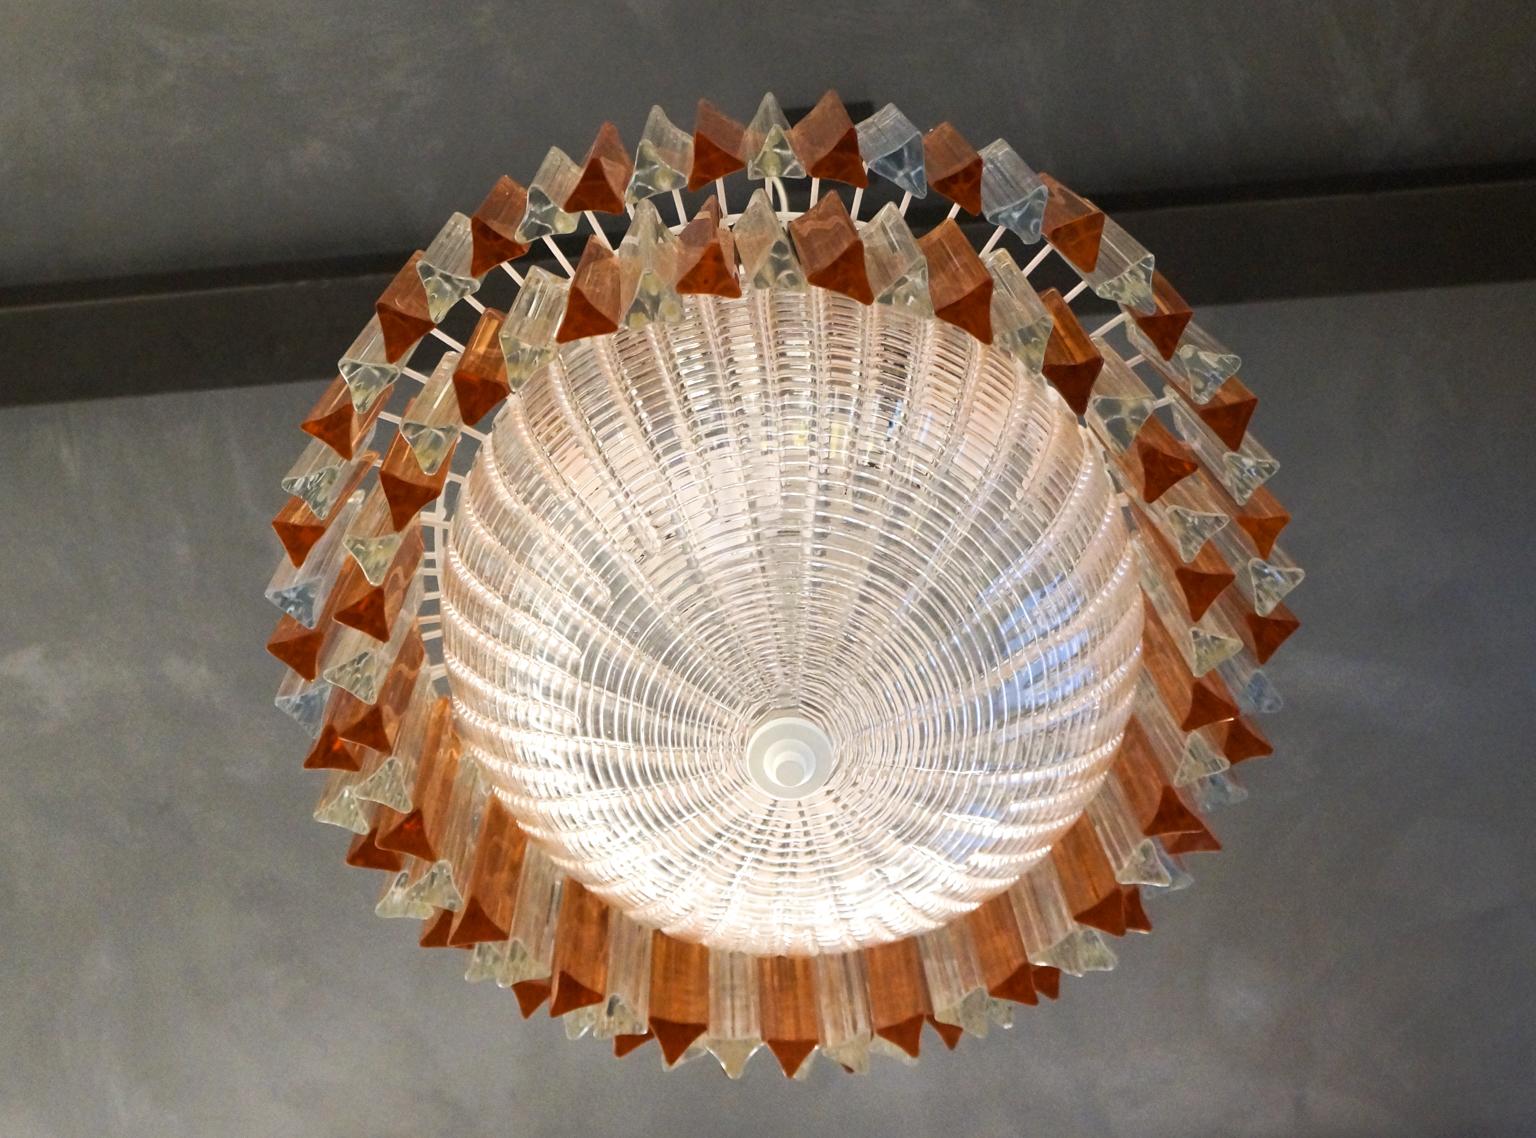 Toso Murano Mid-Century Modern Crystal Rose Venetian Glass Chandelier, 1970s For Sale 4